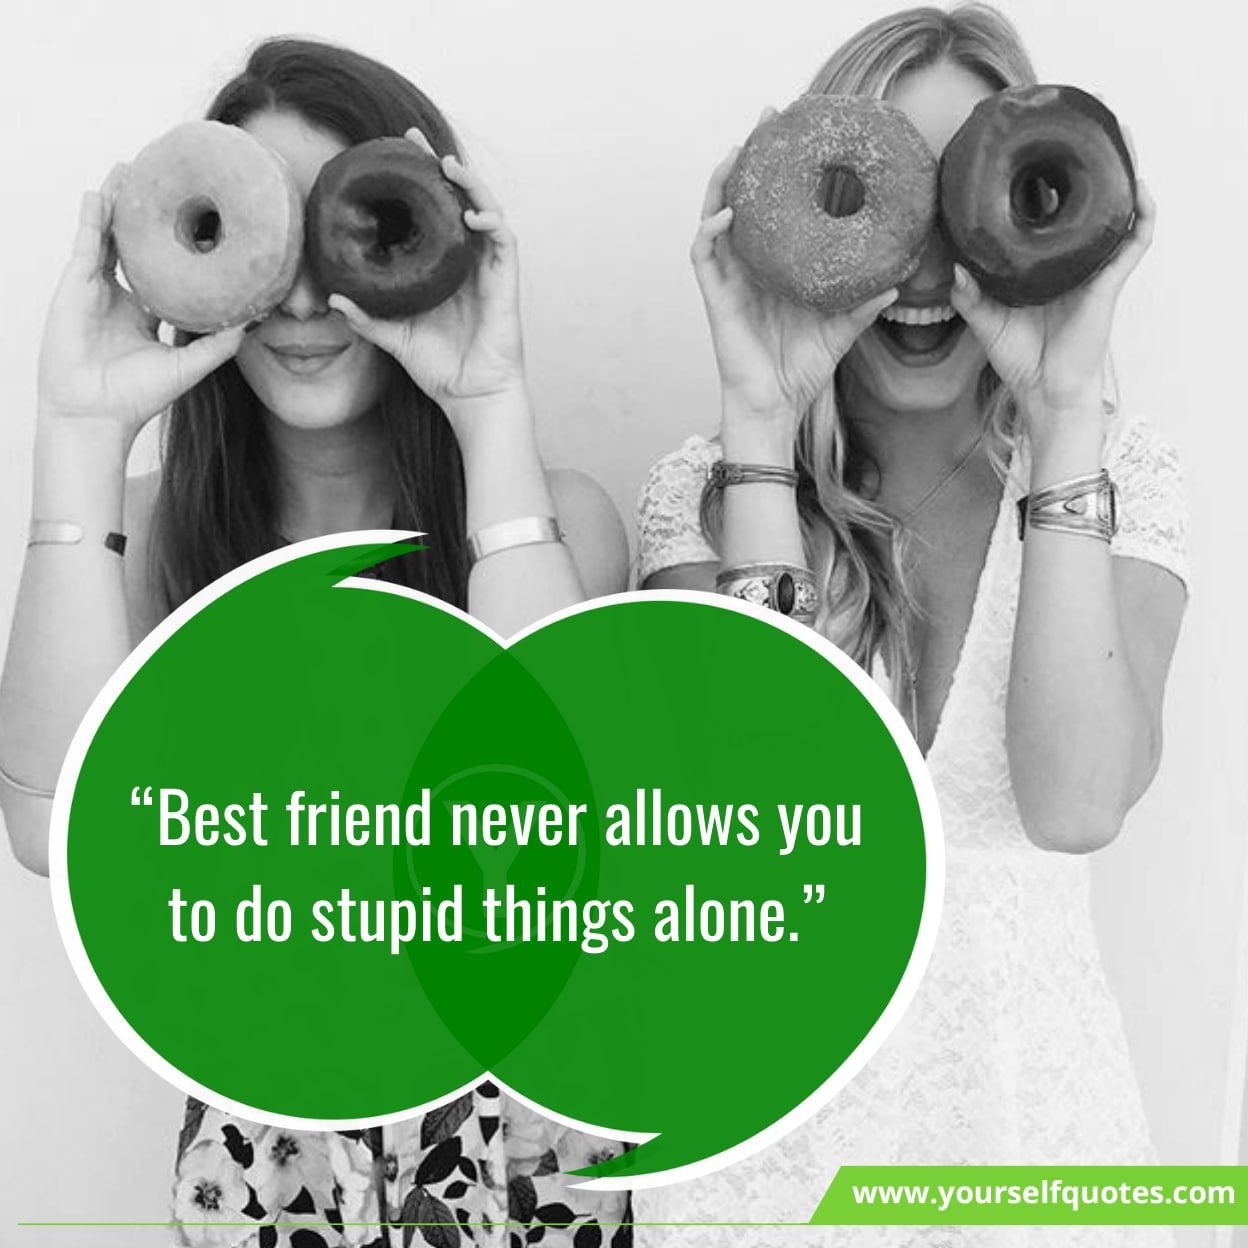 Inspiring Quotes About Best Friend